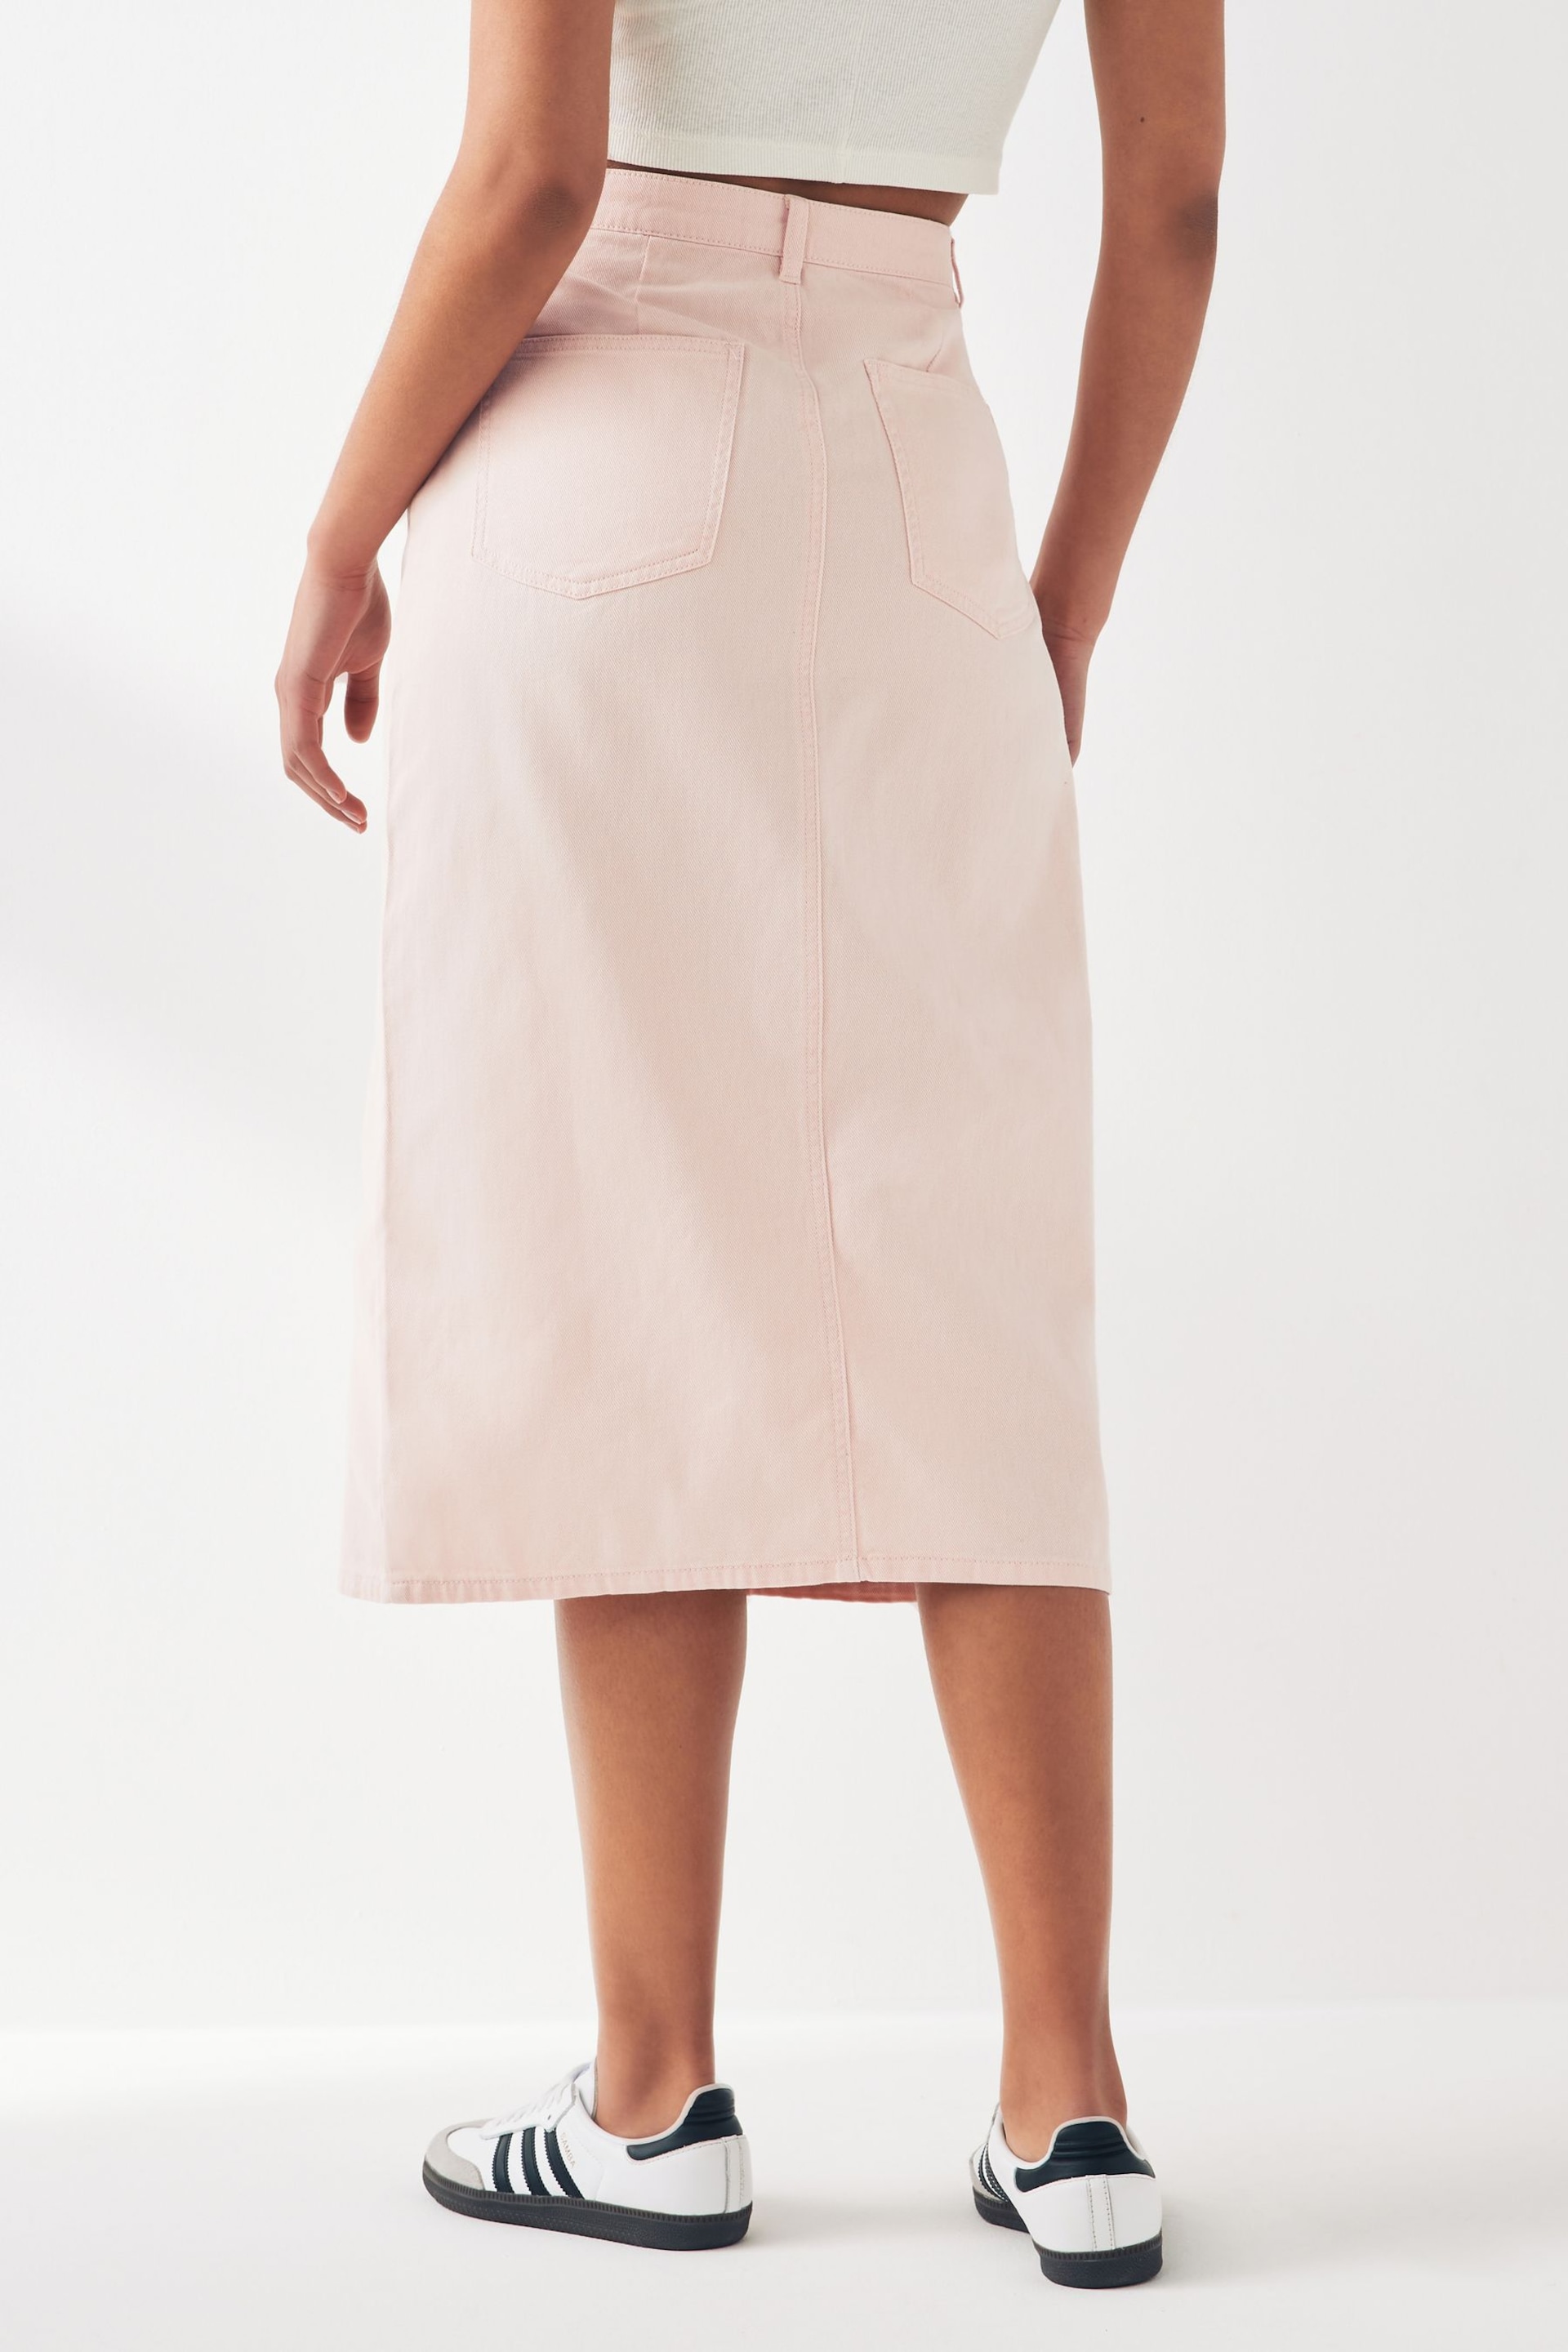 ONLY Pink Denim Midi Skirt With Front Split - Image 2 of 5